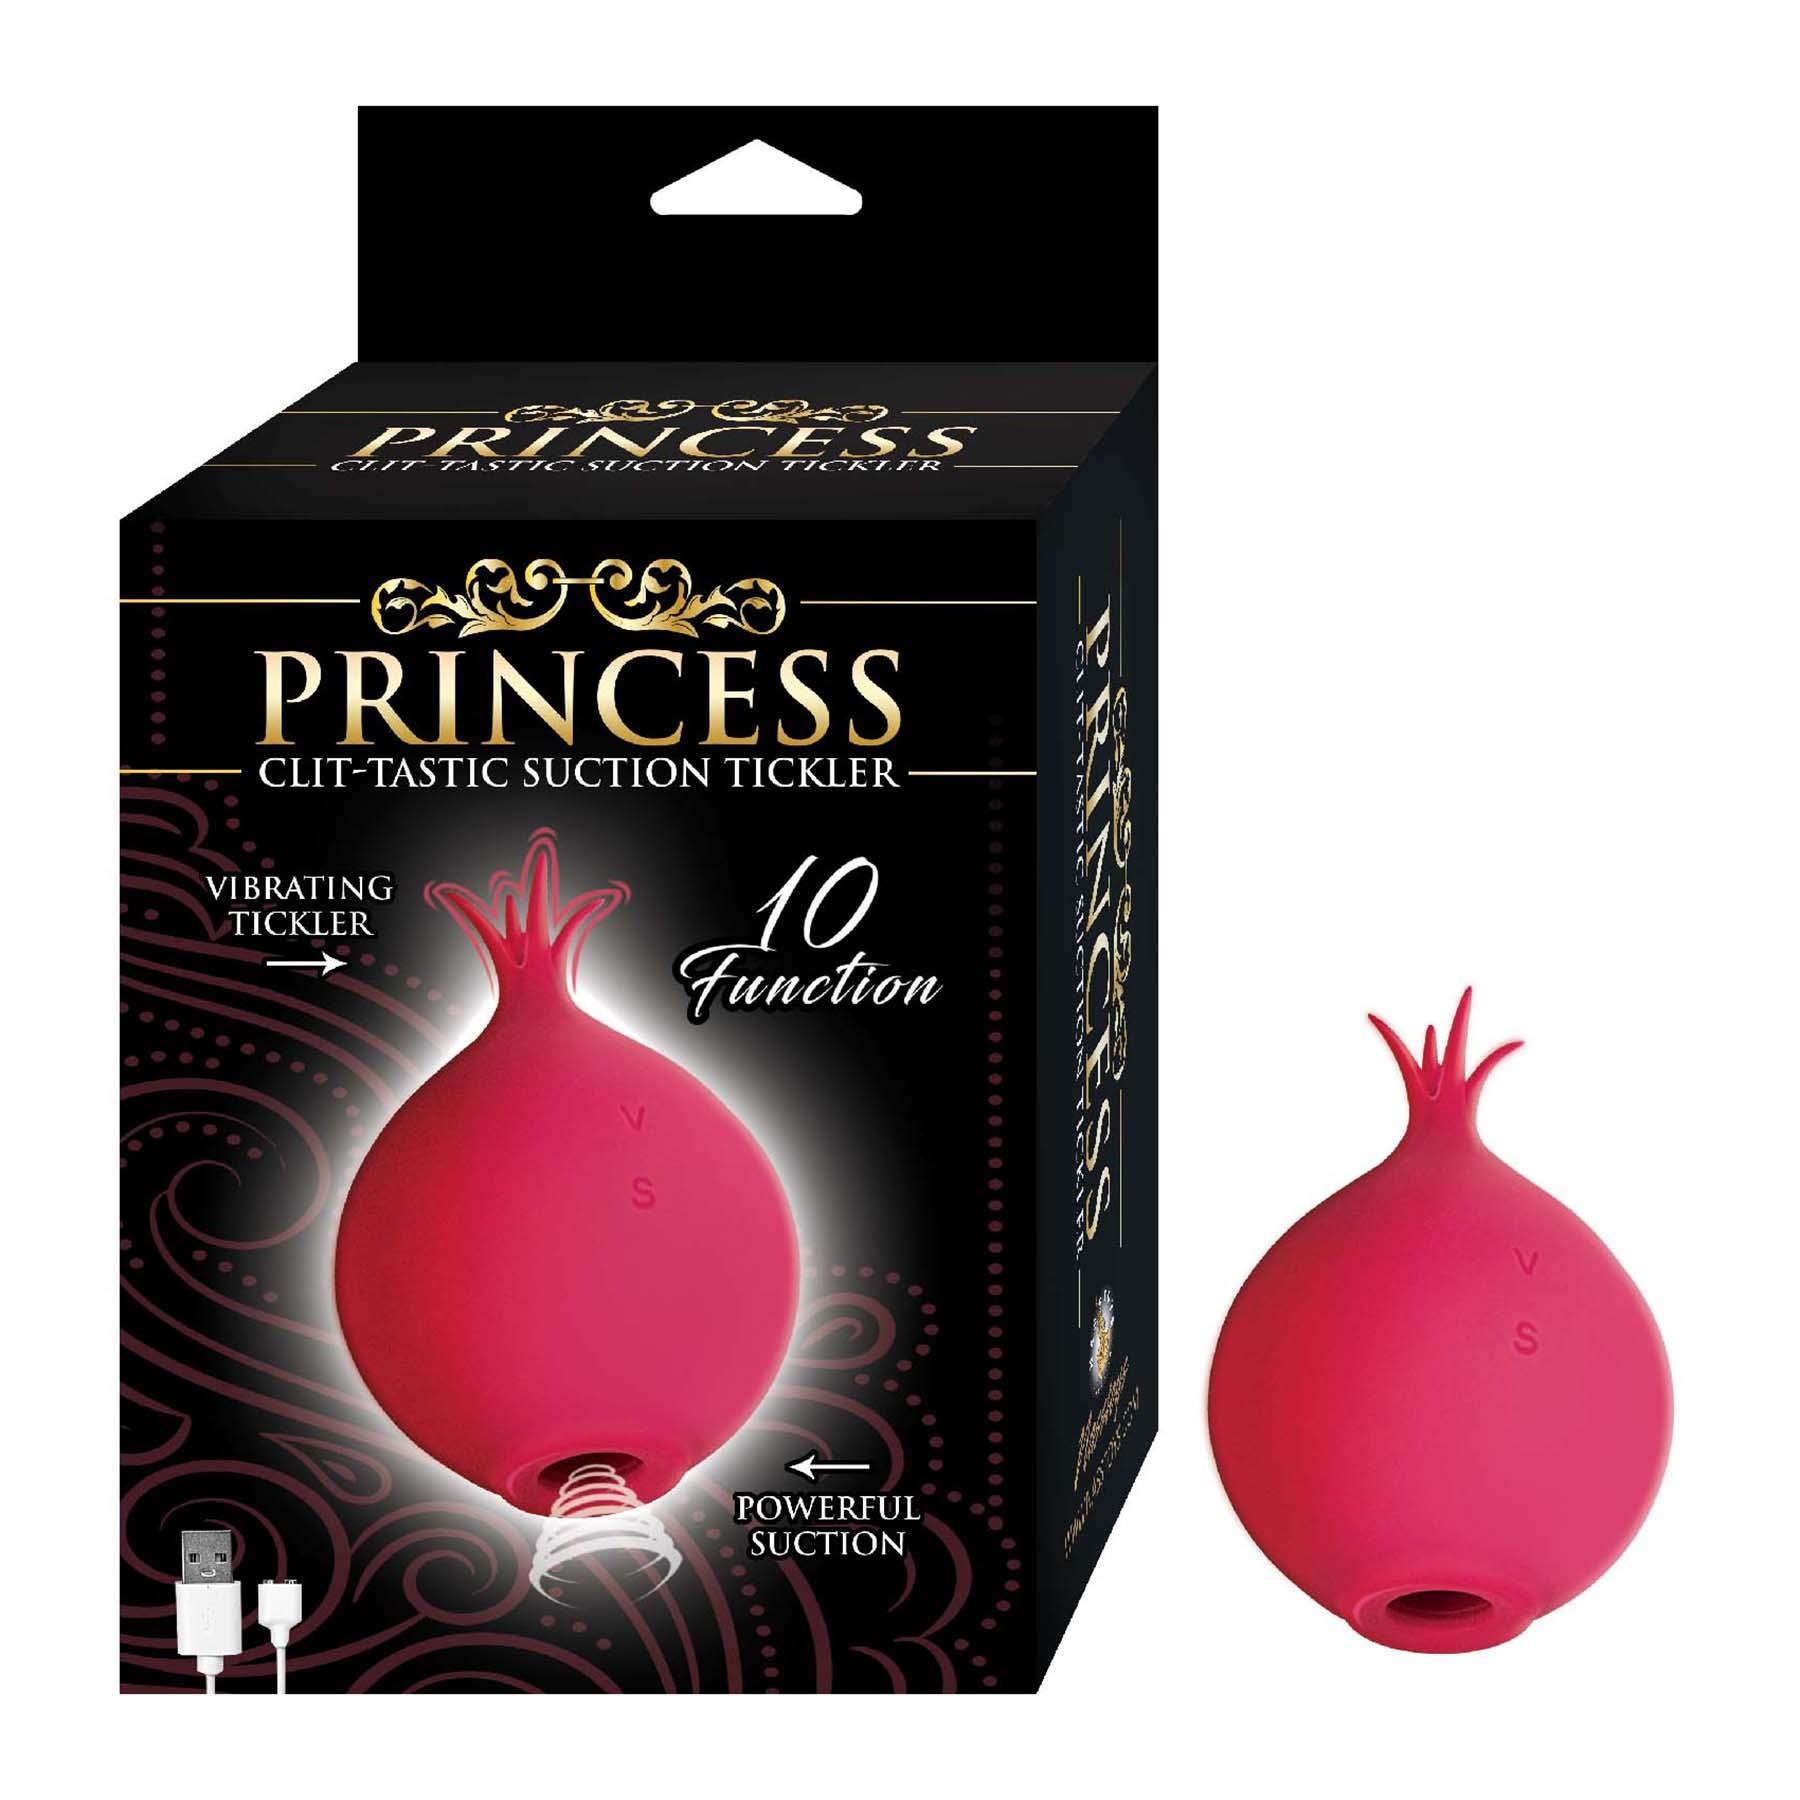 Princess Clit-Tastic Suction Tickler - Product and Packaging Shot